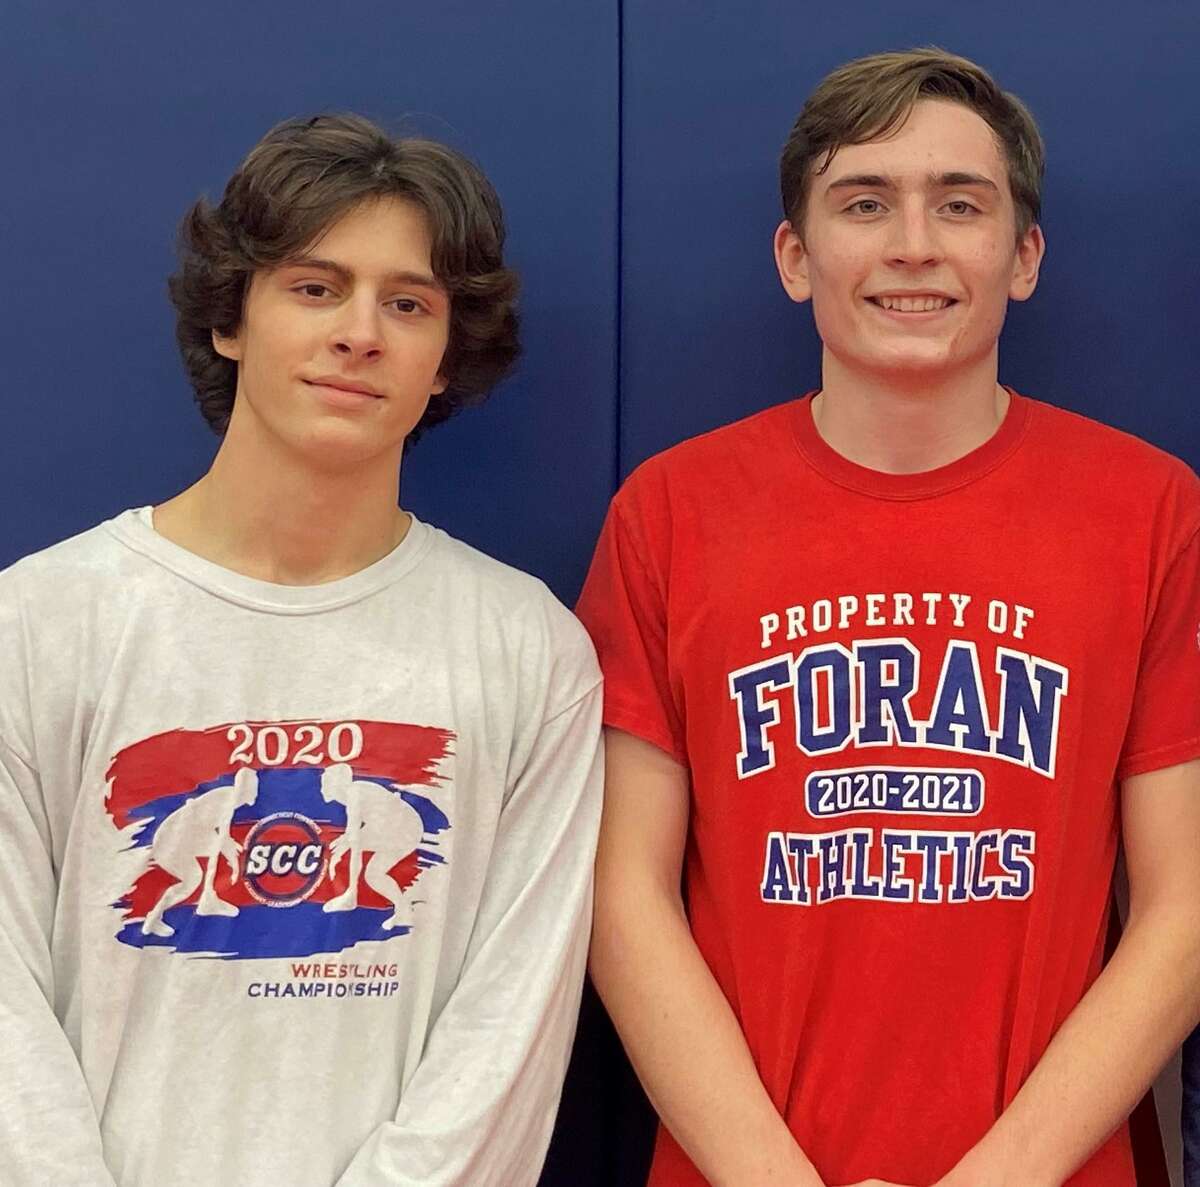 Foran's Craig Mager and Kyle Pokornowski, along with Antonio Madero, earned second team All-SCC in wrestling.